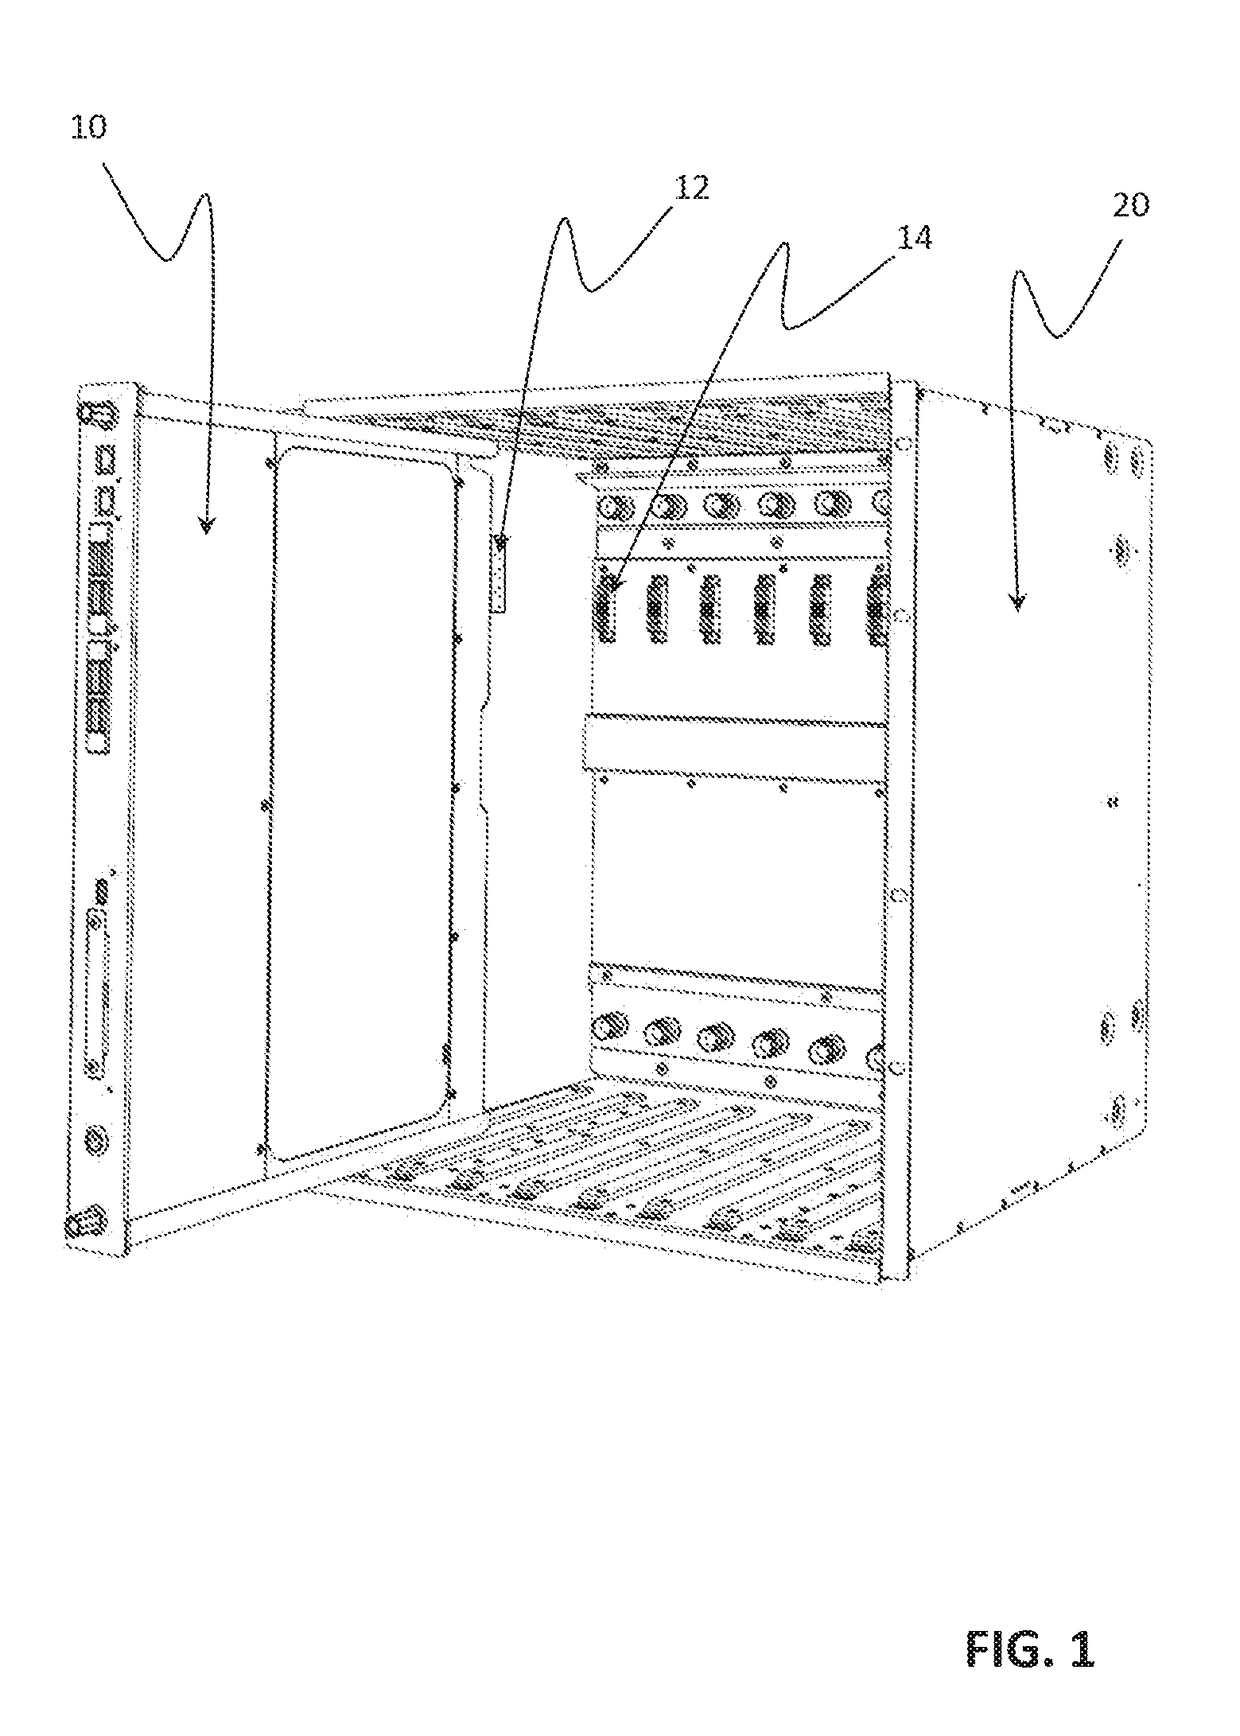 An immersion cooling system